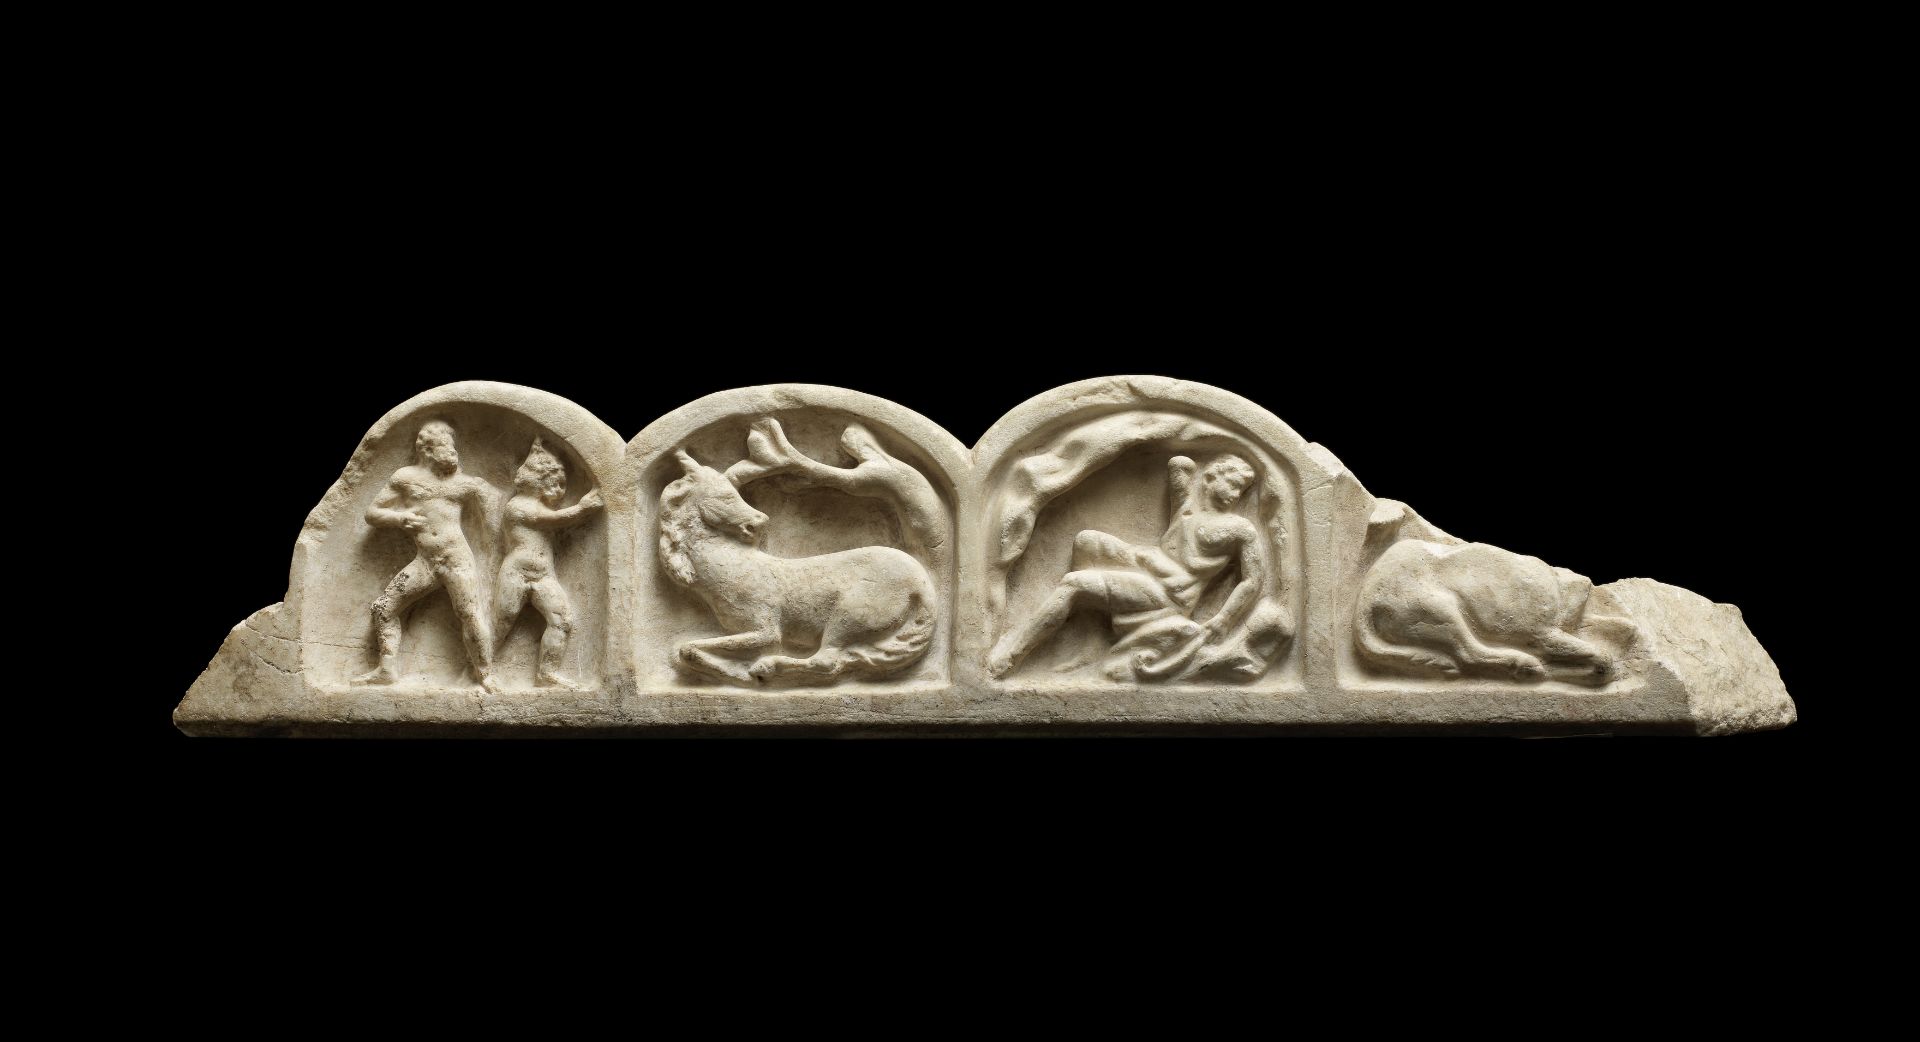 A Roman marble sarcophagus lid fragment with Endymion